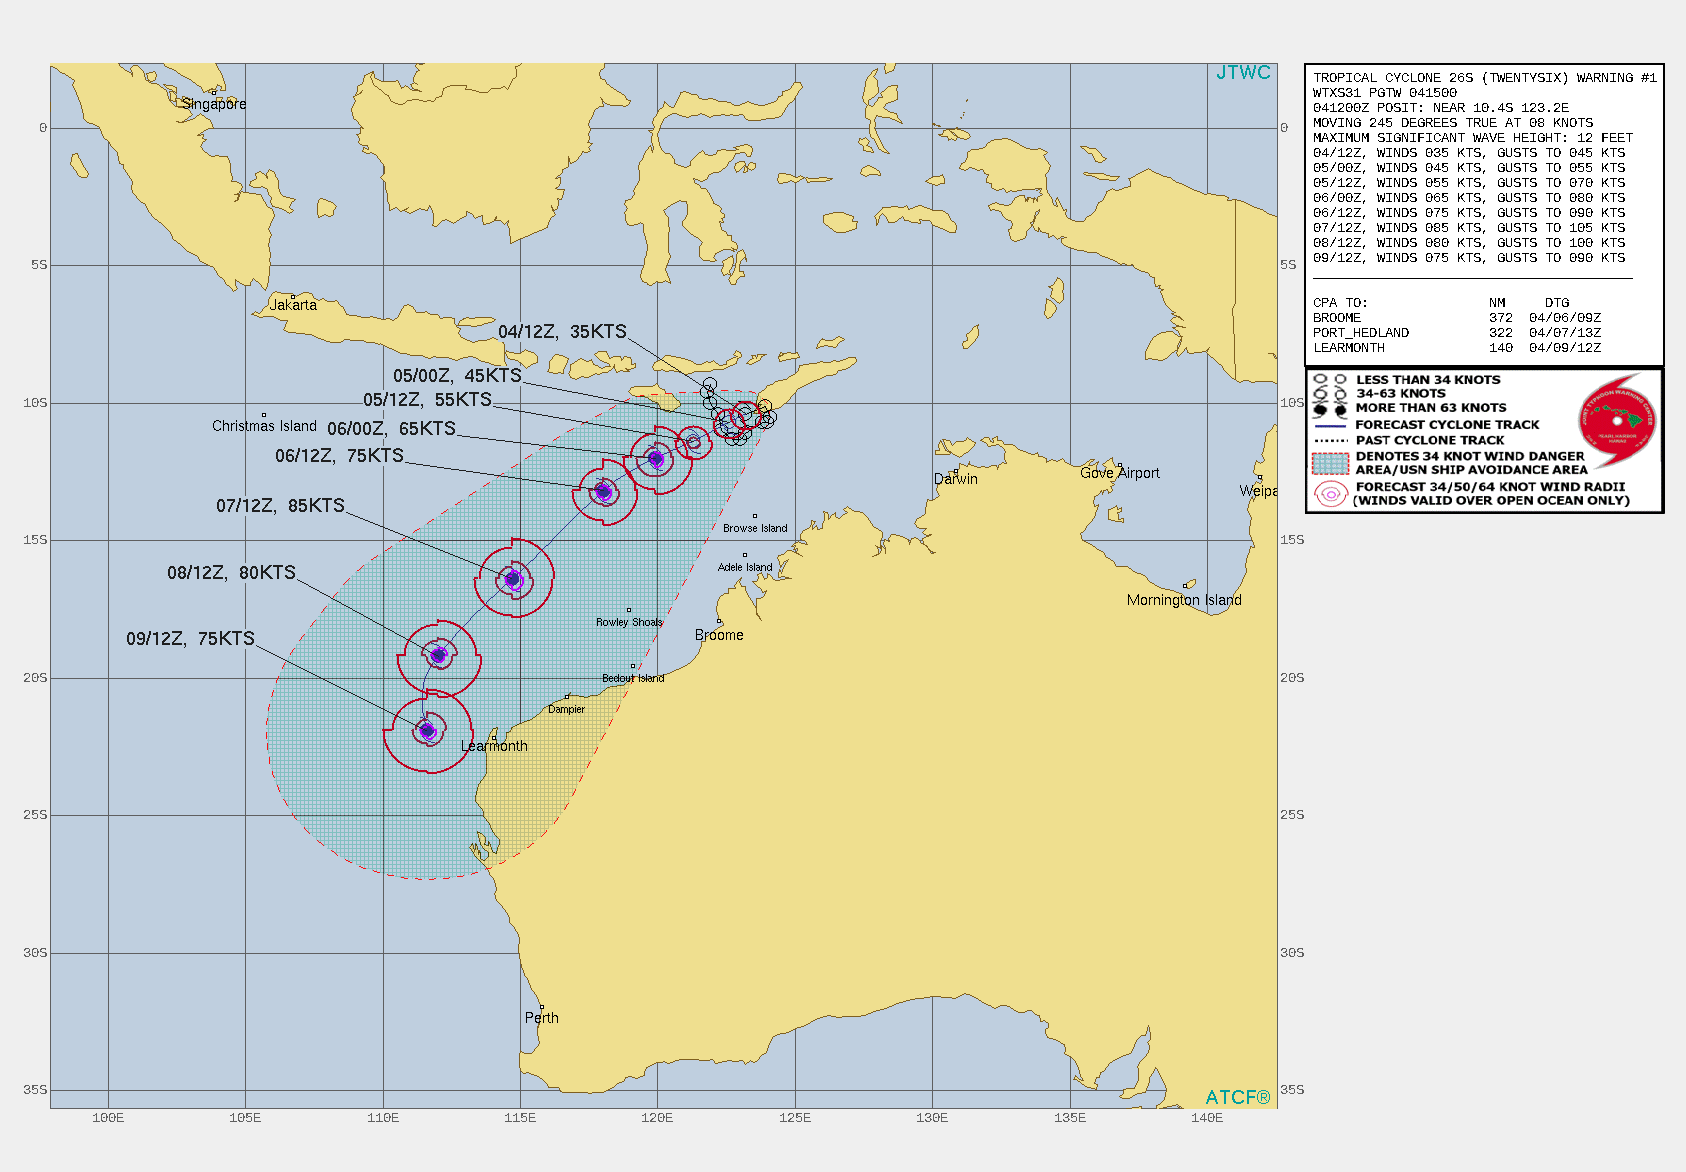 TC 26S. WARNING 1 ISSUED AT 04/15UTC. UPPER LEVEL ANALYSIS INDICATES THE SYSTEM RESIDES EQUATORWARD OF THE SUBTROPICAL RIDGE (STR) WITH GOOD  RADIAL OUTFLOW ALOFT, ENVELOPED IN A SMALL REGION OF LOW TO MODERATE  (10-15 KNOTS) VERTICAL WIND SHEAR, AND WARM SEA SURFACE  TEMPERATURES (28-30C). TC 26S CURRENTLY RESIDES IN A VERY WEAK  STEERING ENVIRONMENT AND WILL BEGIN MOVING SOUTHWESTWARD AS A RIDGE  BUILDS IN FROM THE SOUTHEAST THROUGH THE REMAINDER OF THE FORECAST.  AS THE SYSTEM MOVES SOUTHWEST, AN INCREASE IN POLEWARD OUTFLOW WILL  ENHANCE THE INTENSIFICATION TO A PEAK STRENGTH OF 85 KNOTS/US CATEGORY 2 BY 72H. DURING THIS TIMEFRAME, BINARY INTERACTION WITH INVEST 90S IS  LIKELY, THE TWO SYSTEMS REMAINING NEARLY 925KM APART BY SOME MODEL  ESTIMATES. THIS INTERACTION WILL CREATE A DYNAMIC CHANGE TO TC 26S  INTENSIFICATION AND TRACK MOTION, ADDING INHERENT UNCERTAINTY.